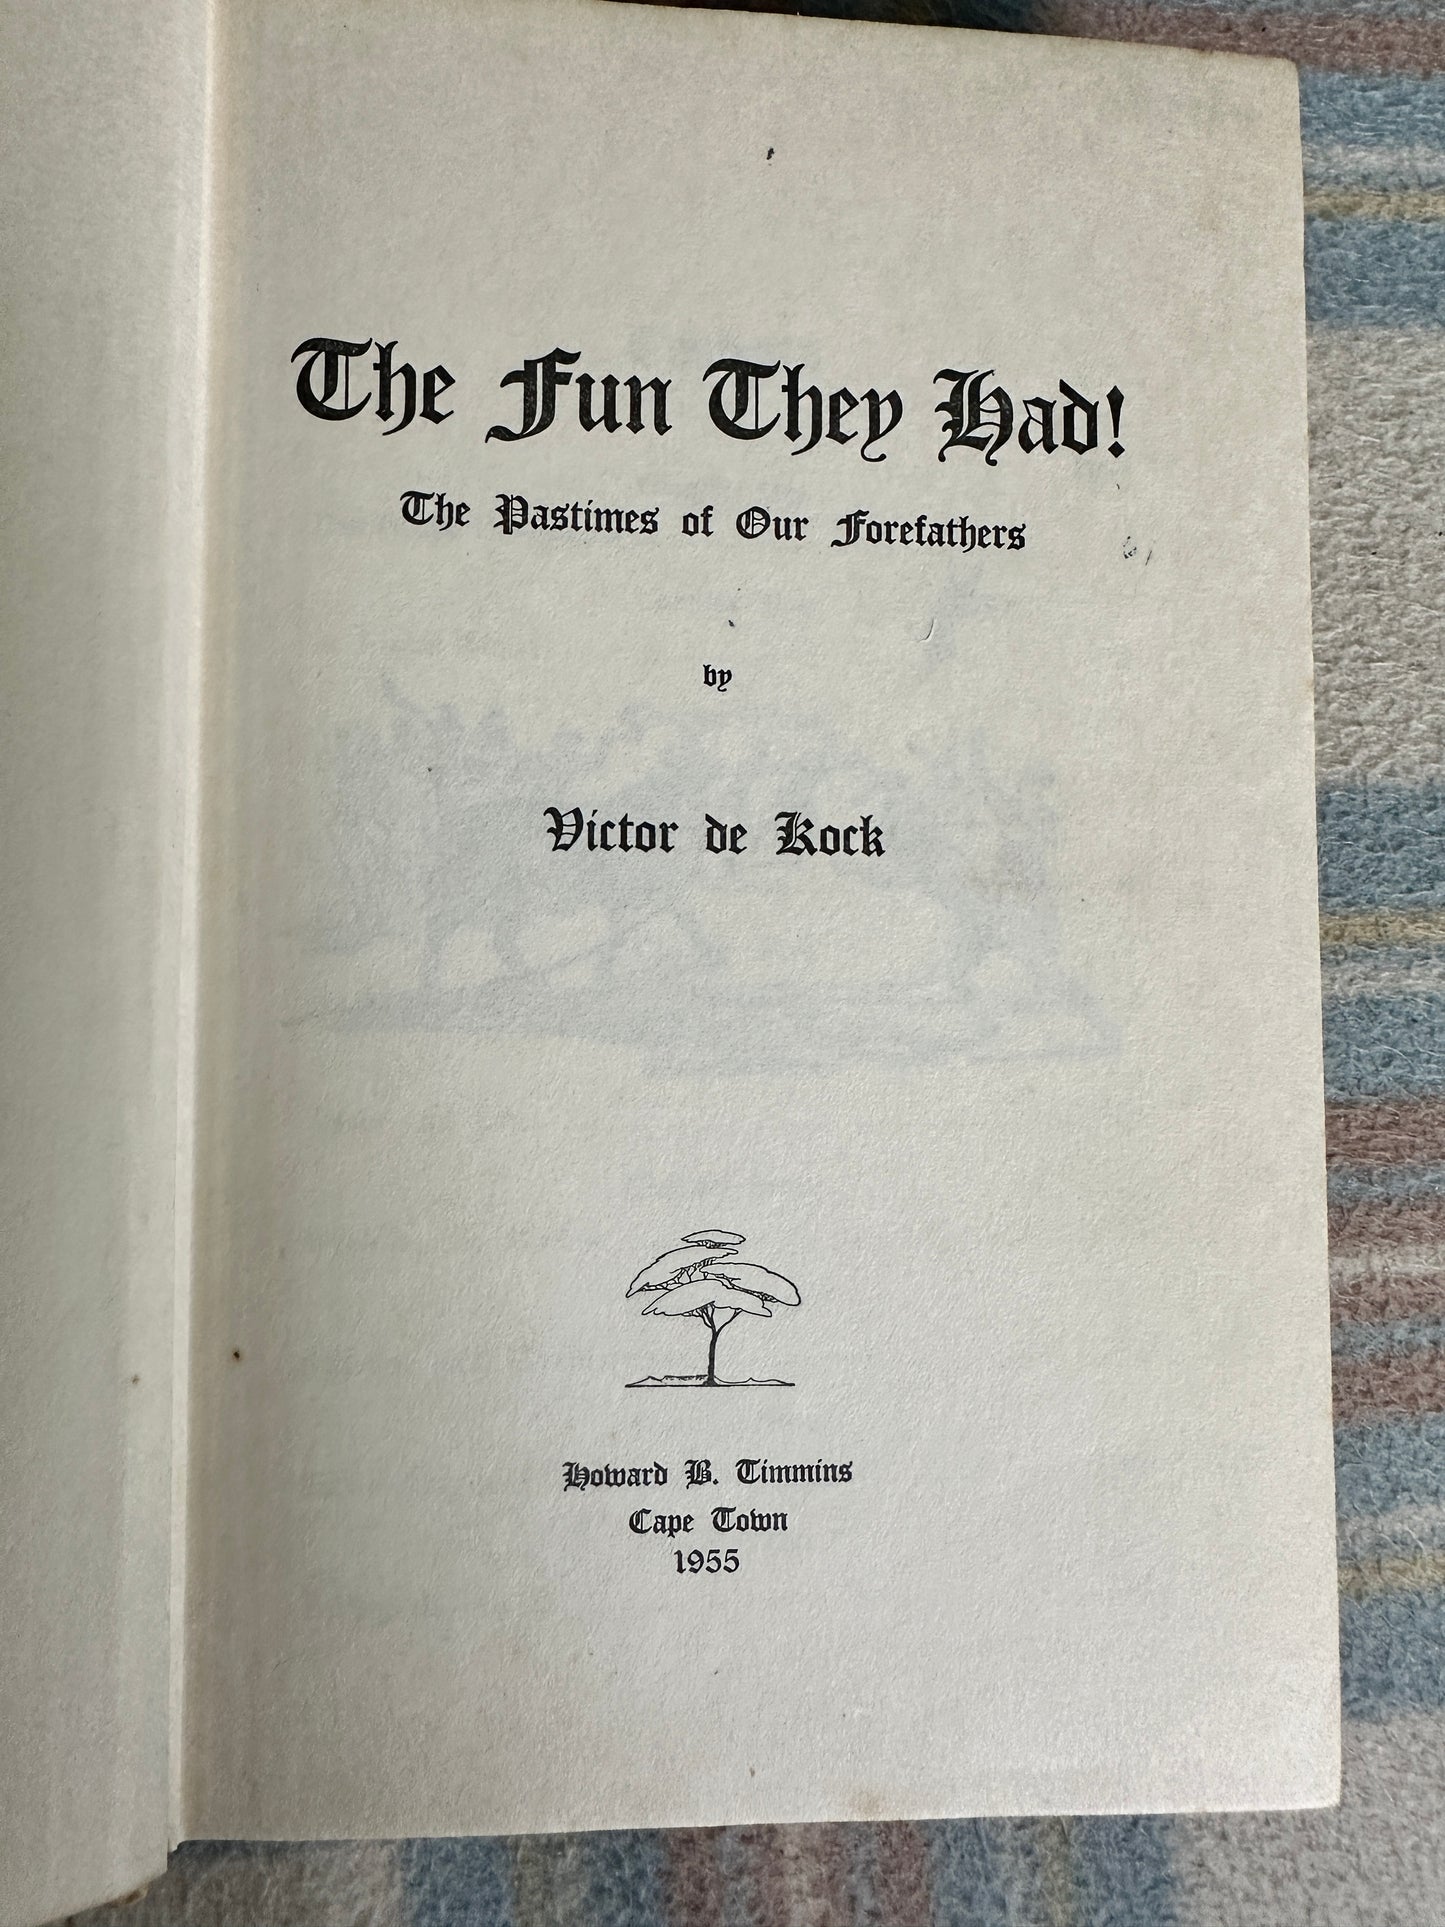 1955*1st Signed* The Fun They Had! - Victor De Kock(Howard Timmins Pub Cape Town)